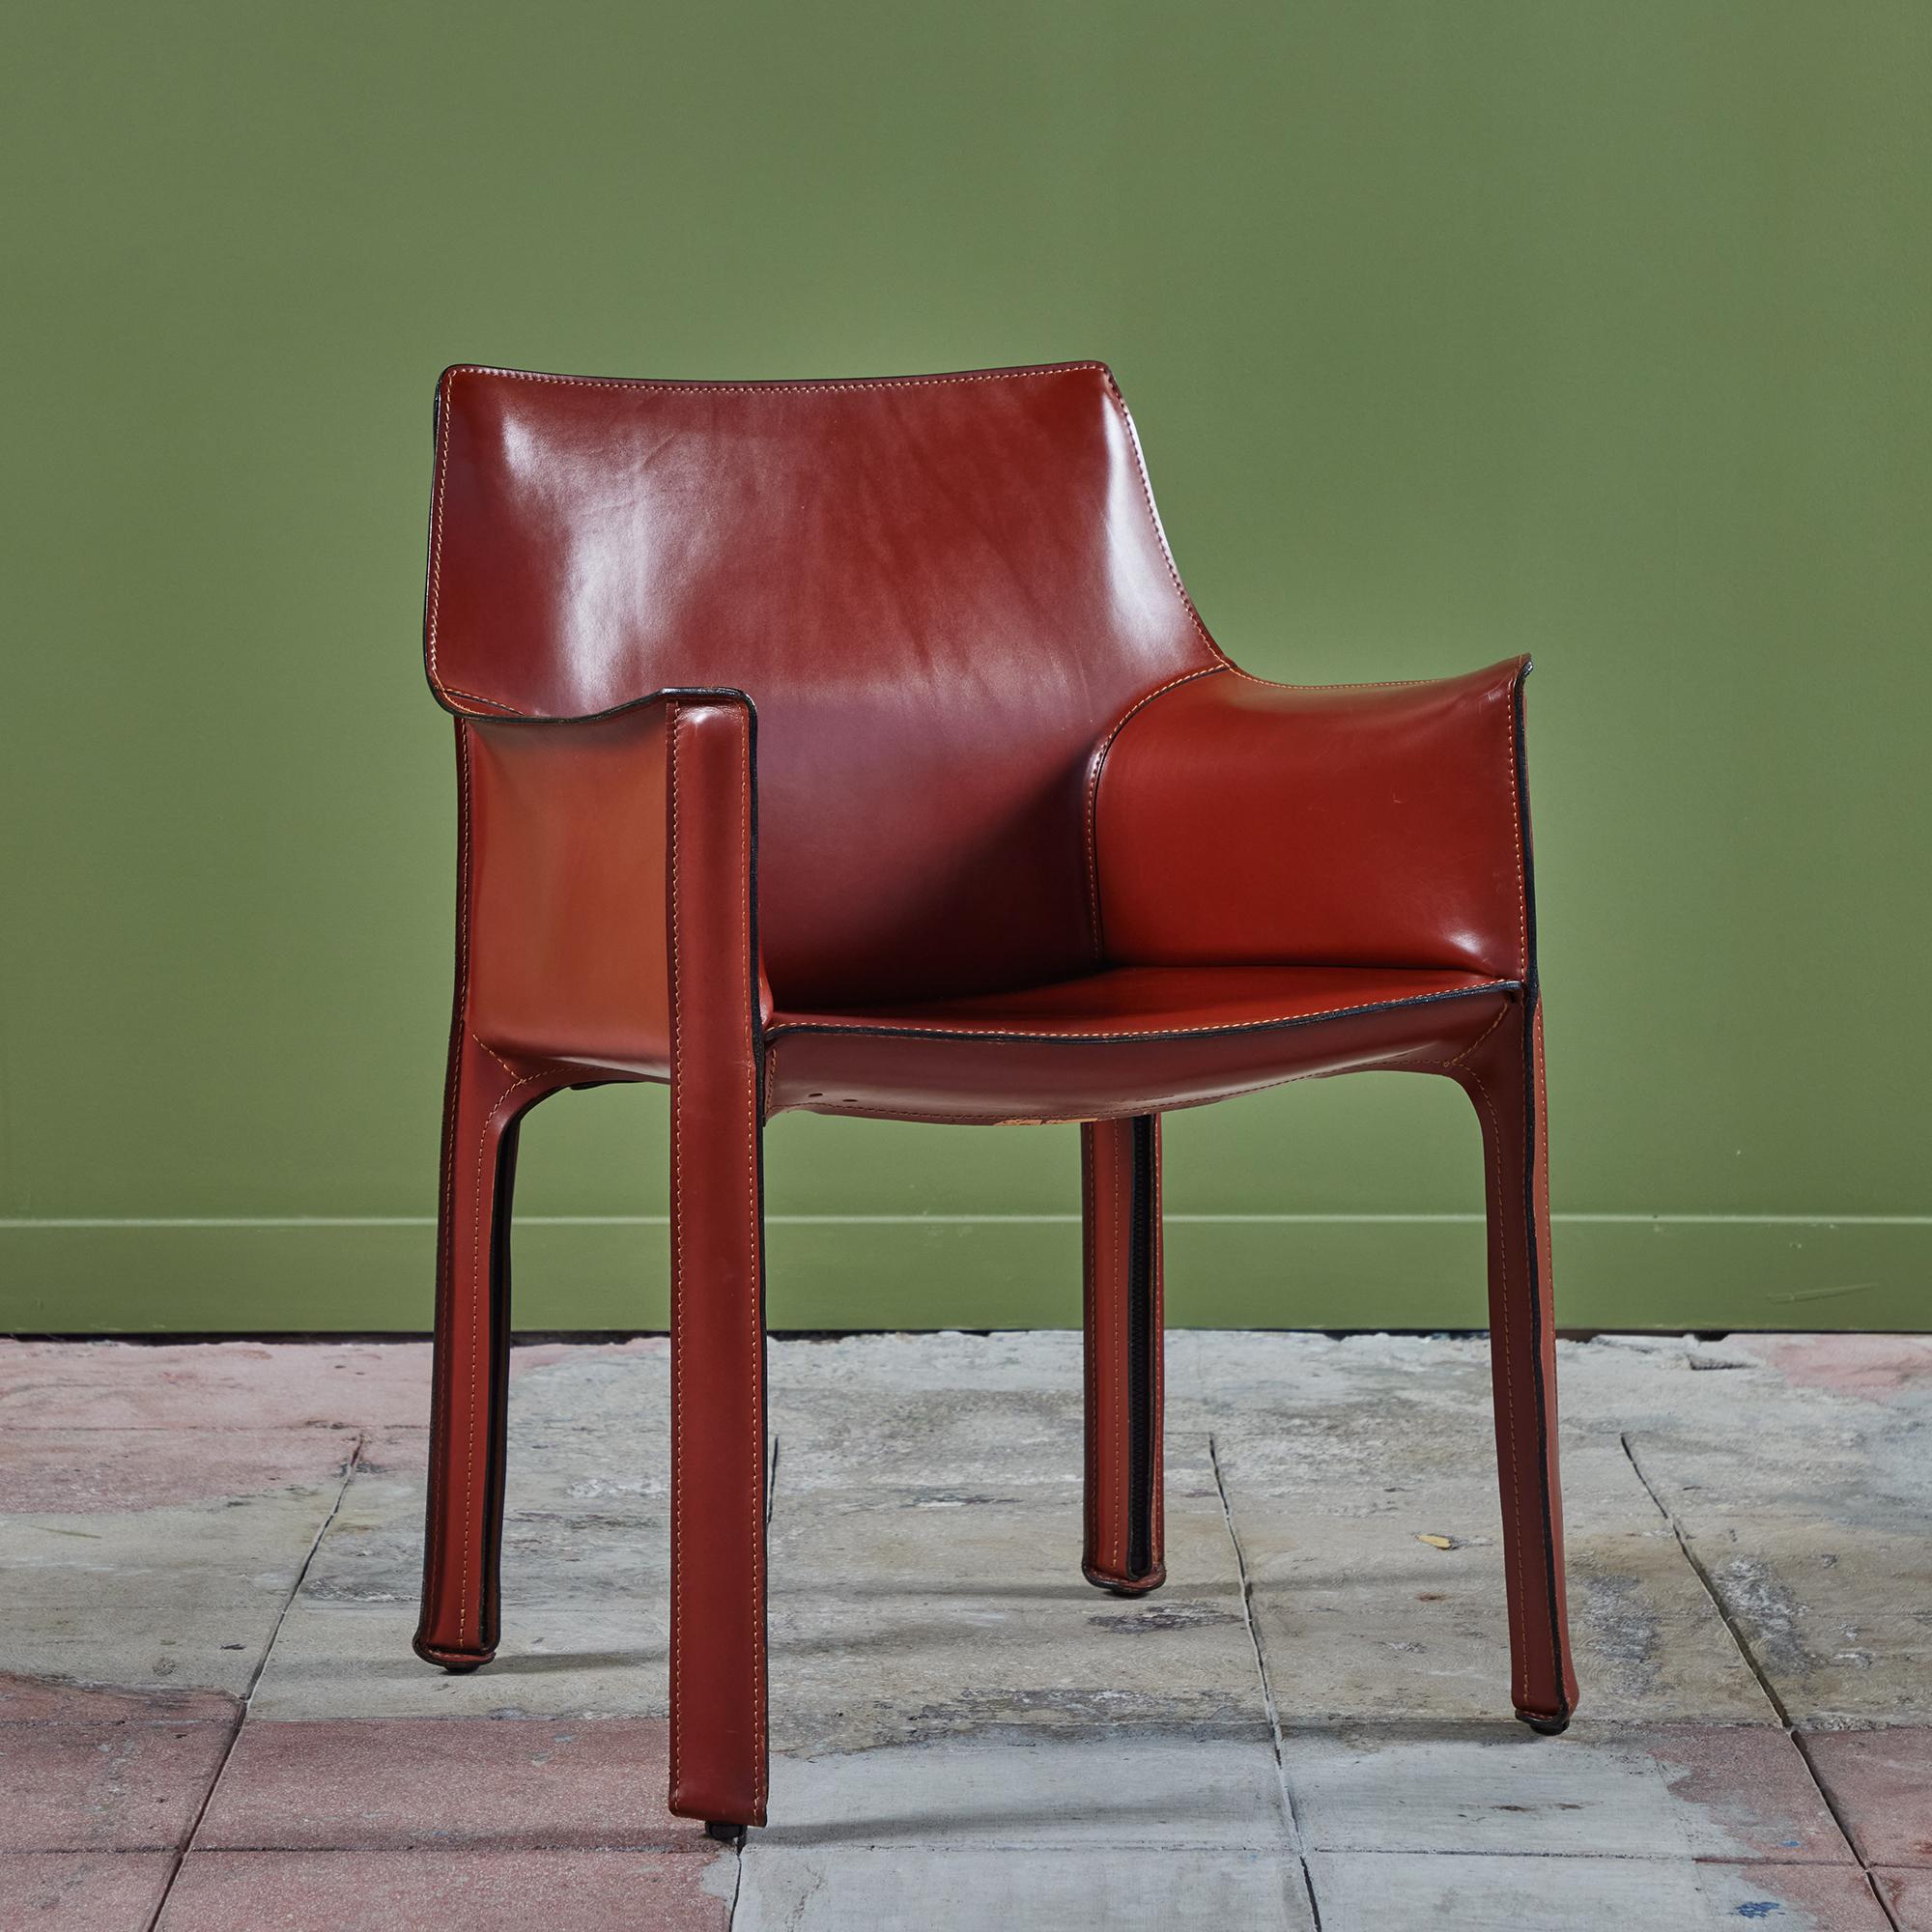 This iconic chair designed by Mario Bellini for Cassina c.1970s, Italy, features the original deep red saddle leather which is wrapped atop a steel frame. The back legs feature a black zippered detail. The chair can easily be used for dining or an